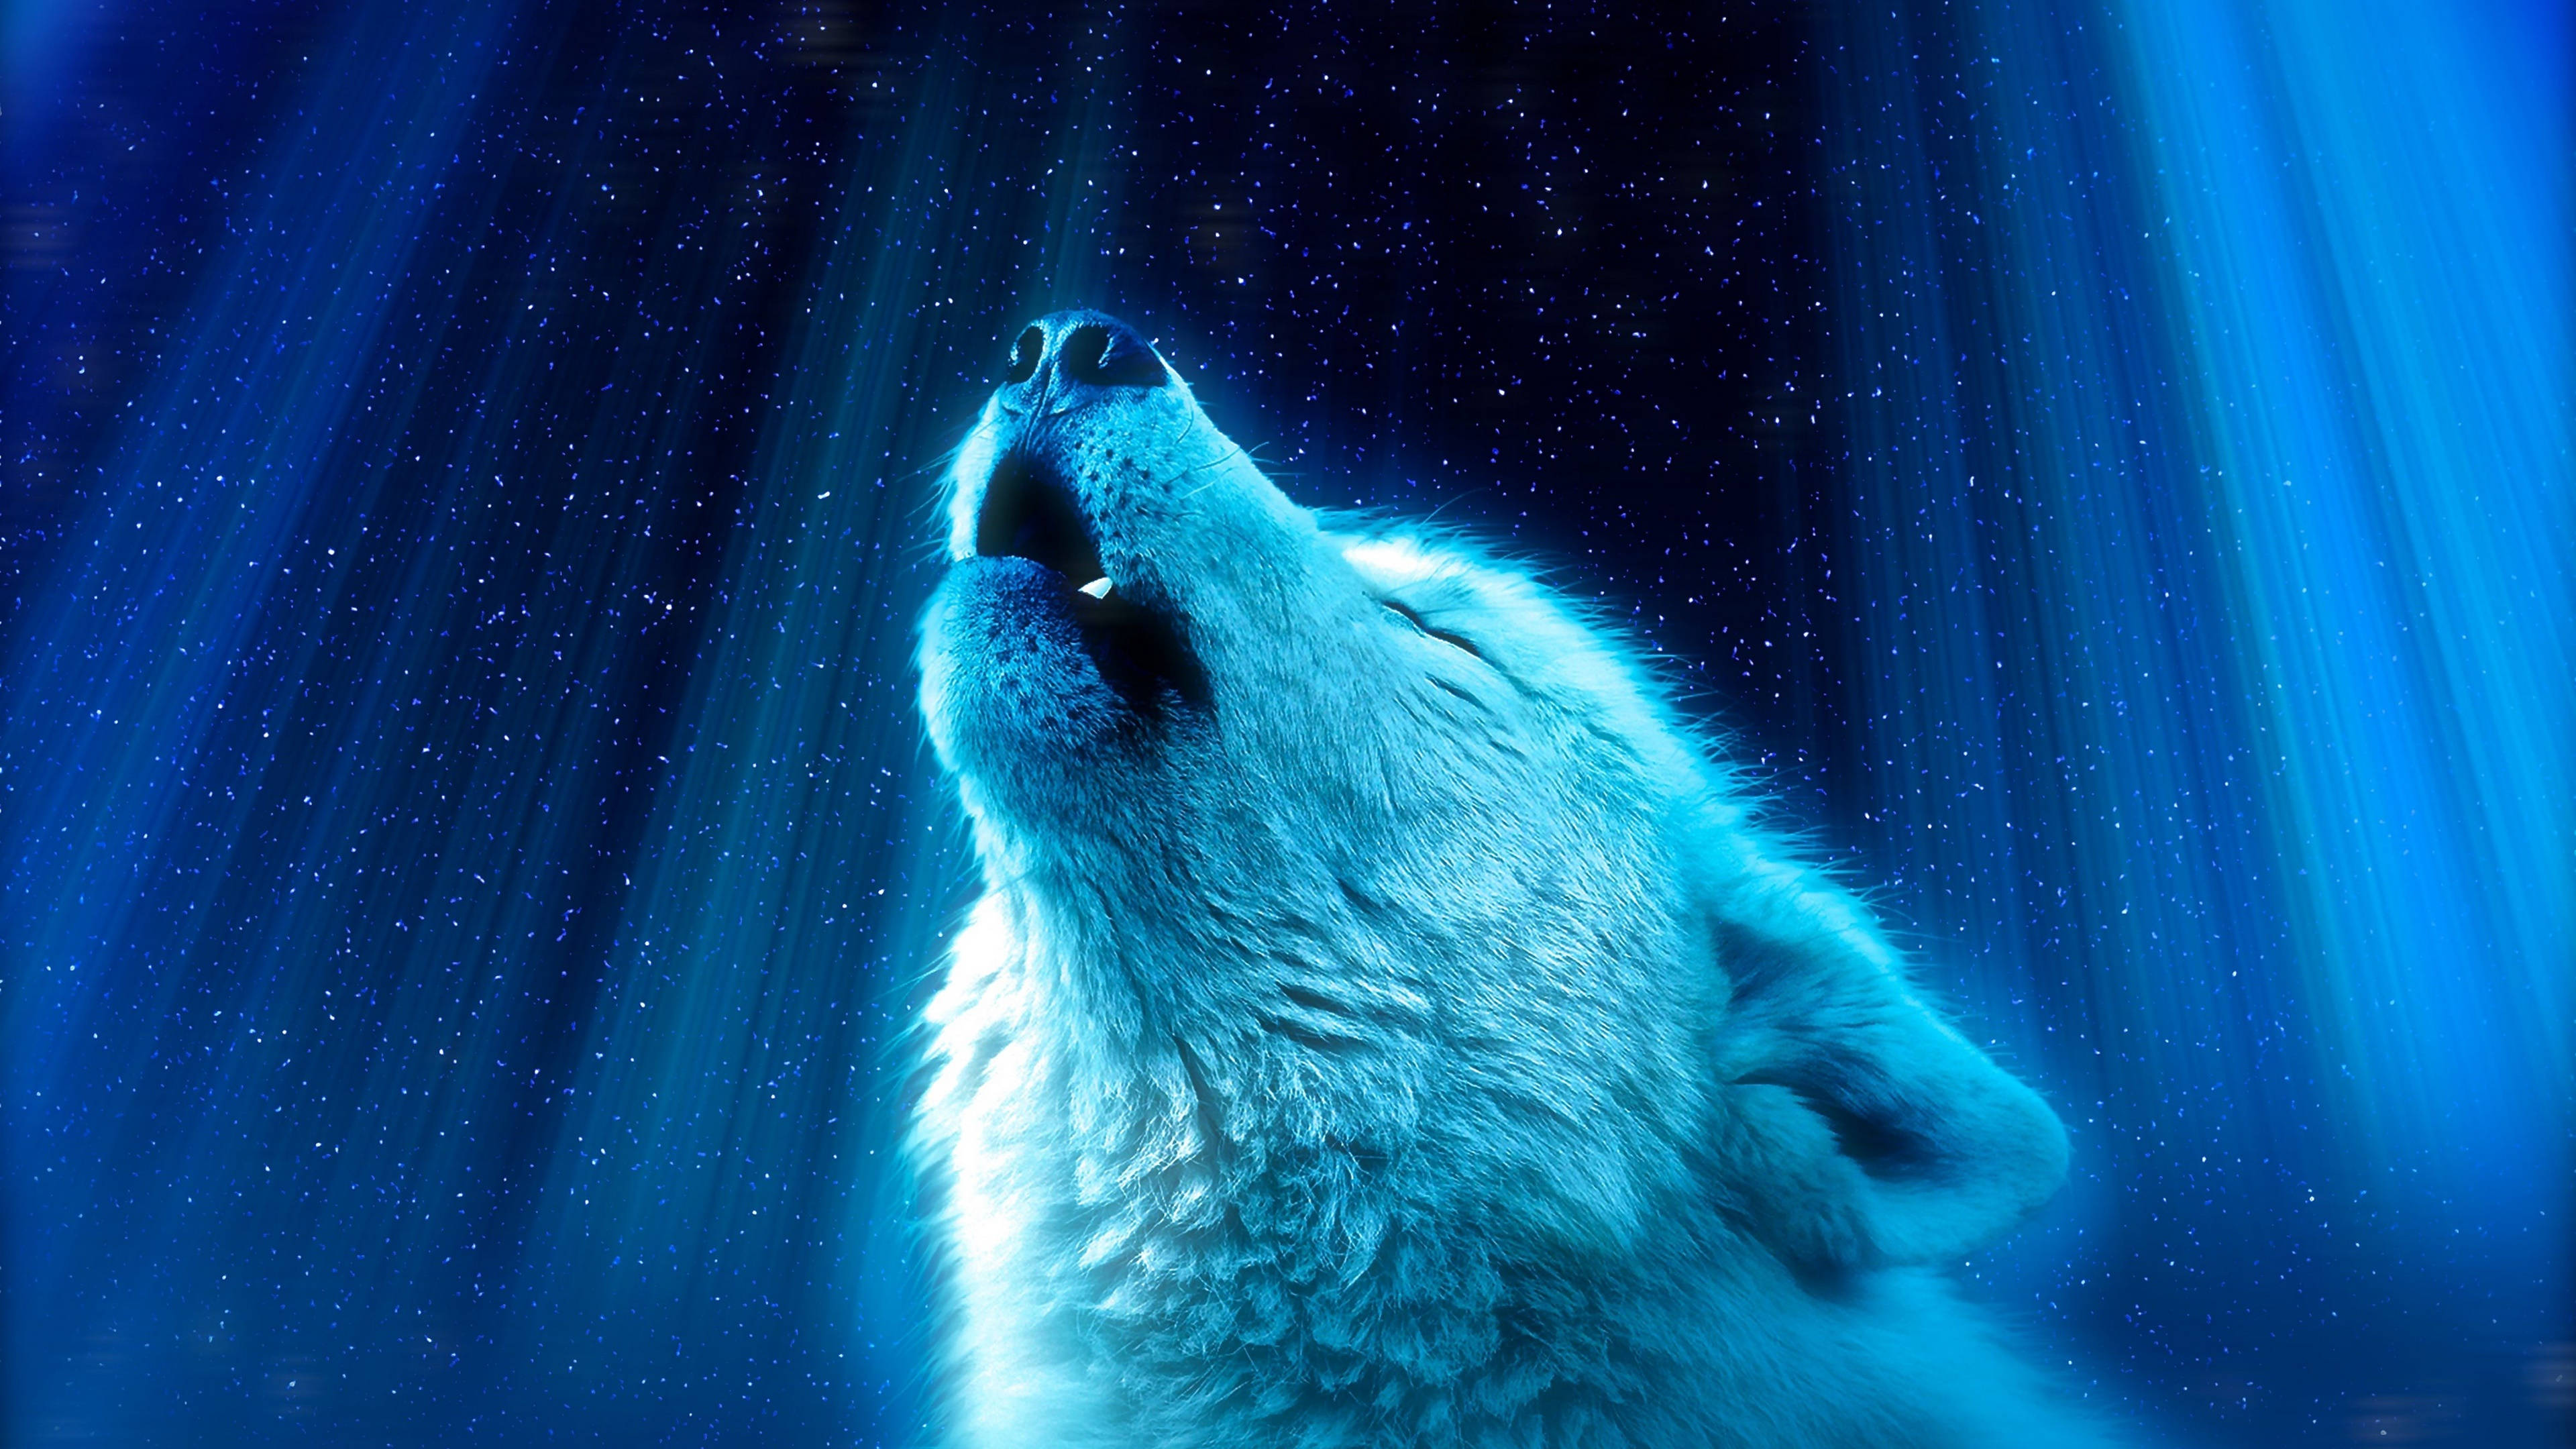 Cool Starry Galaxy Night Howling Wolf Wallpaper